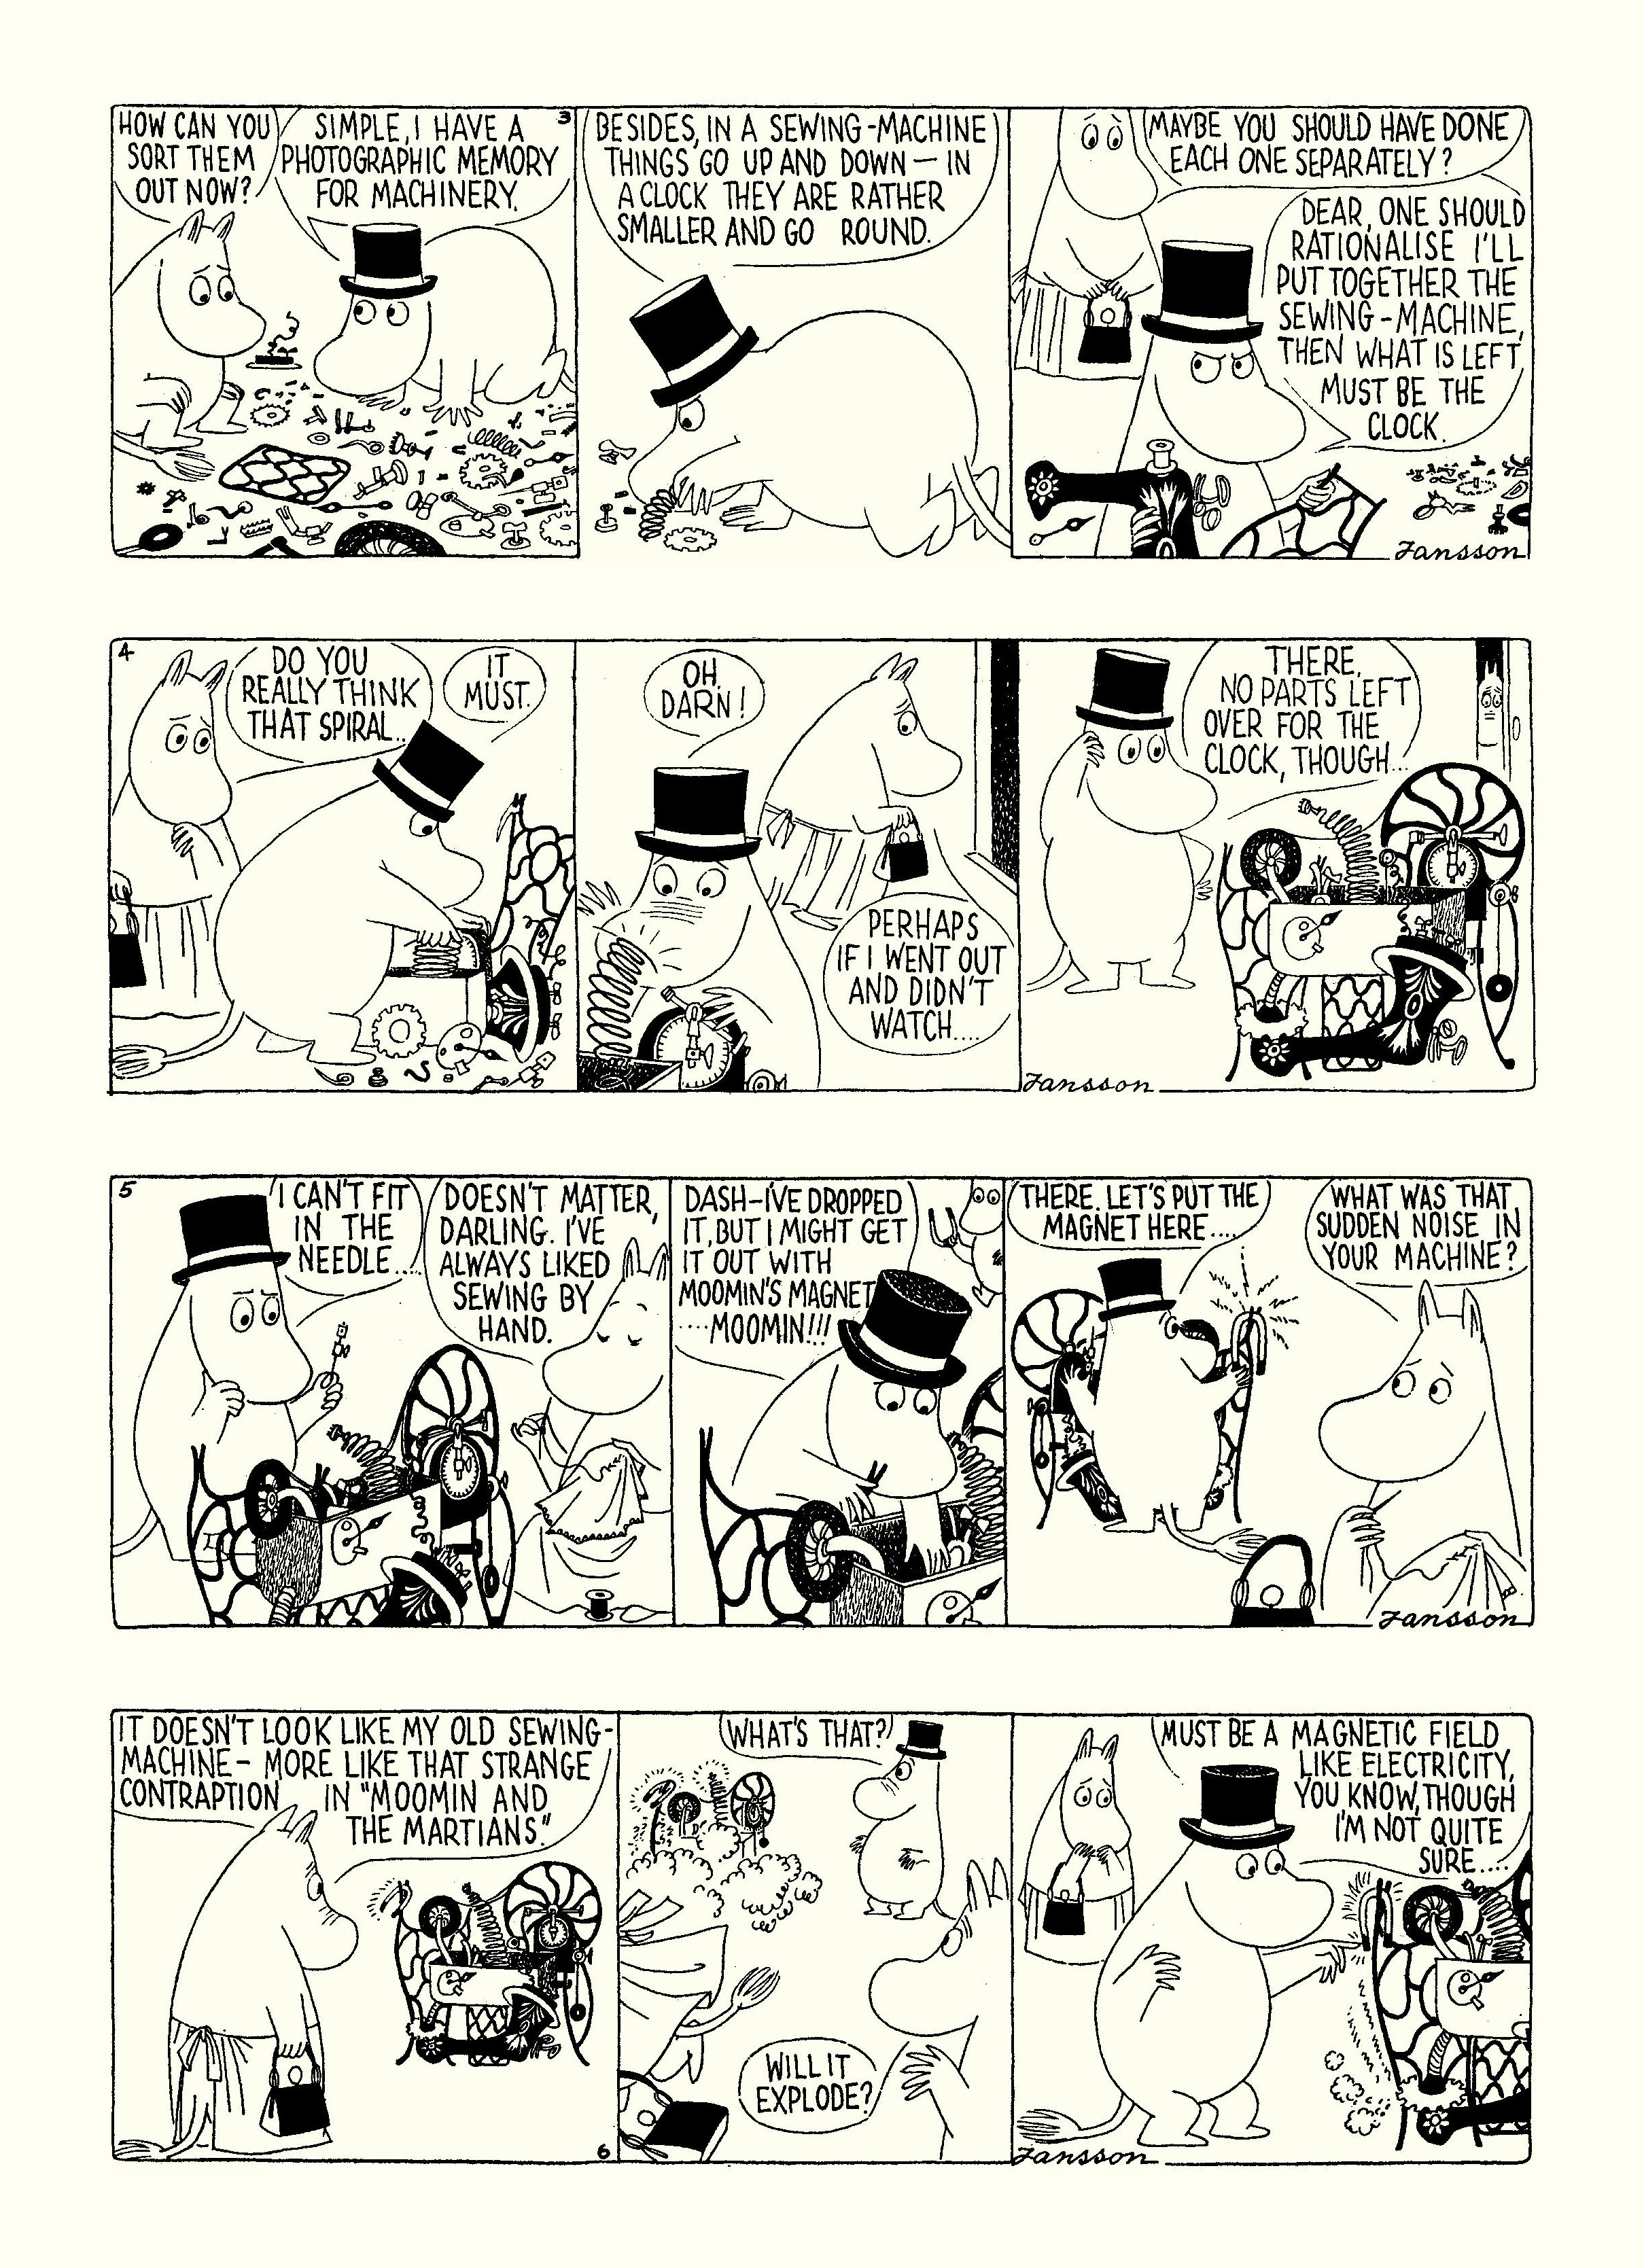 Read online Moomin: The Complete Tove Jansson Comic Strip comic -  Issue # TPB 4 - 7